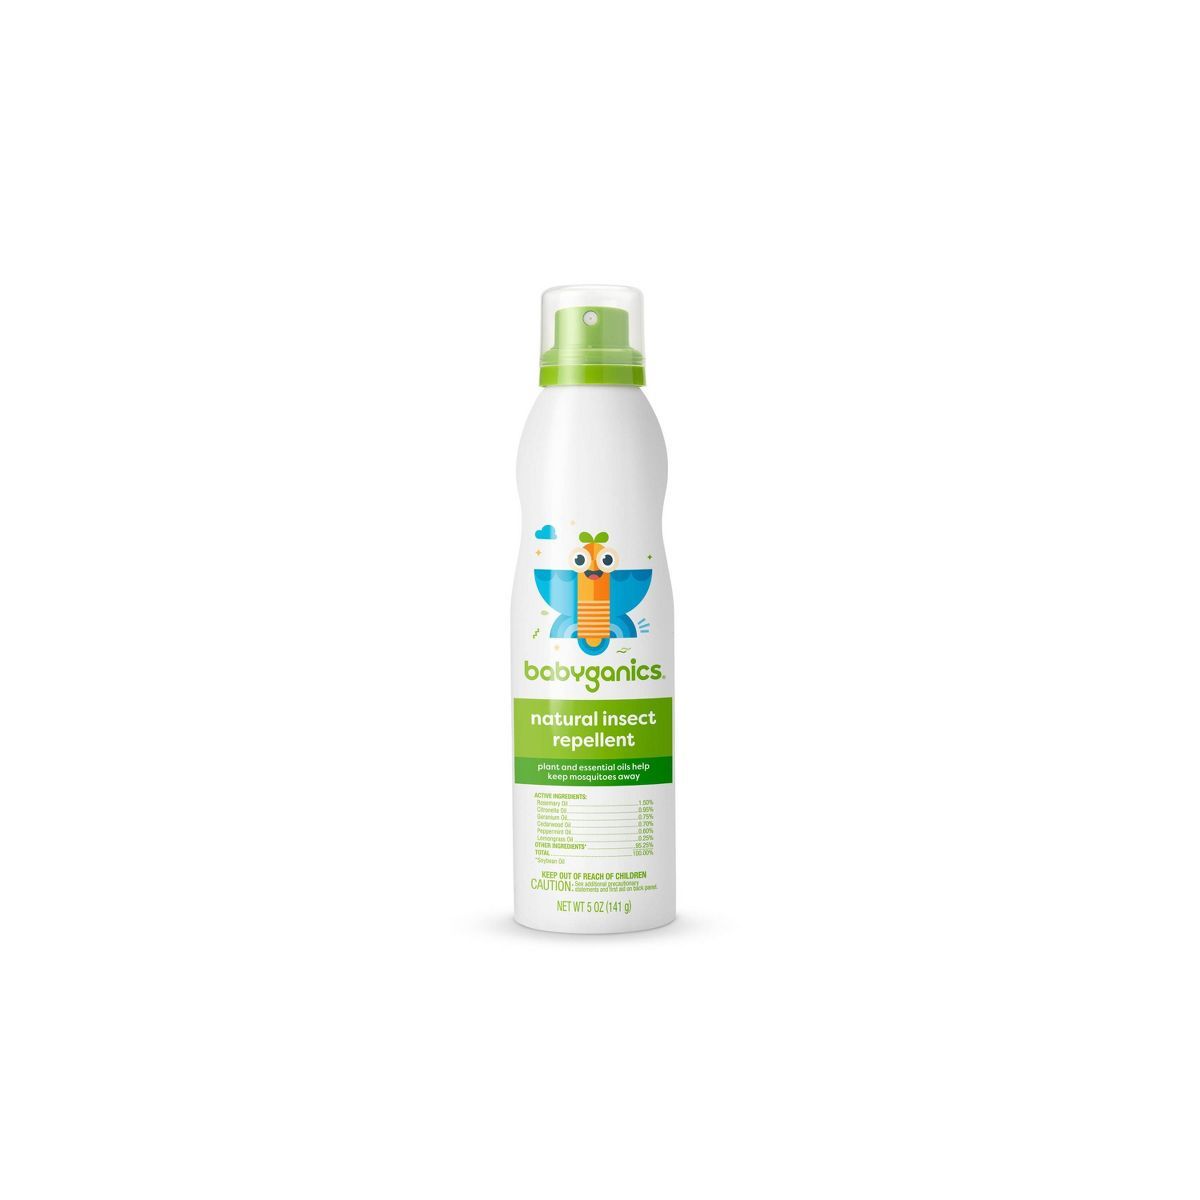 Babyganics Insect Repellent Continuous Spray 5 oz | Target